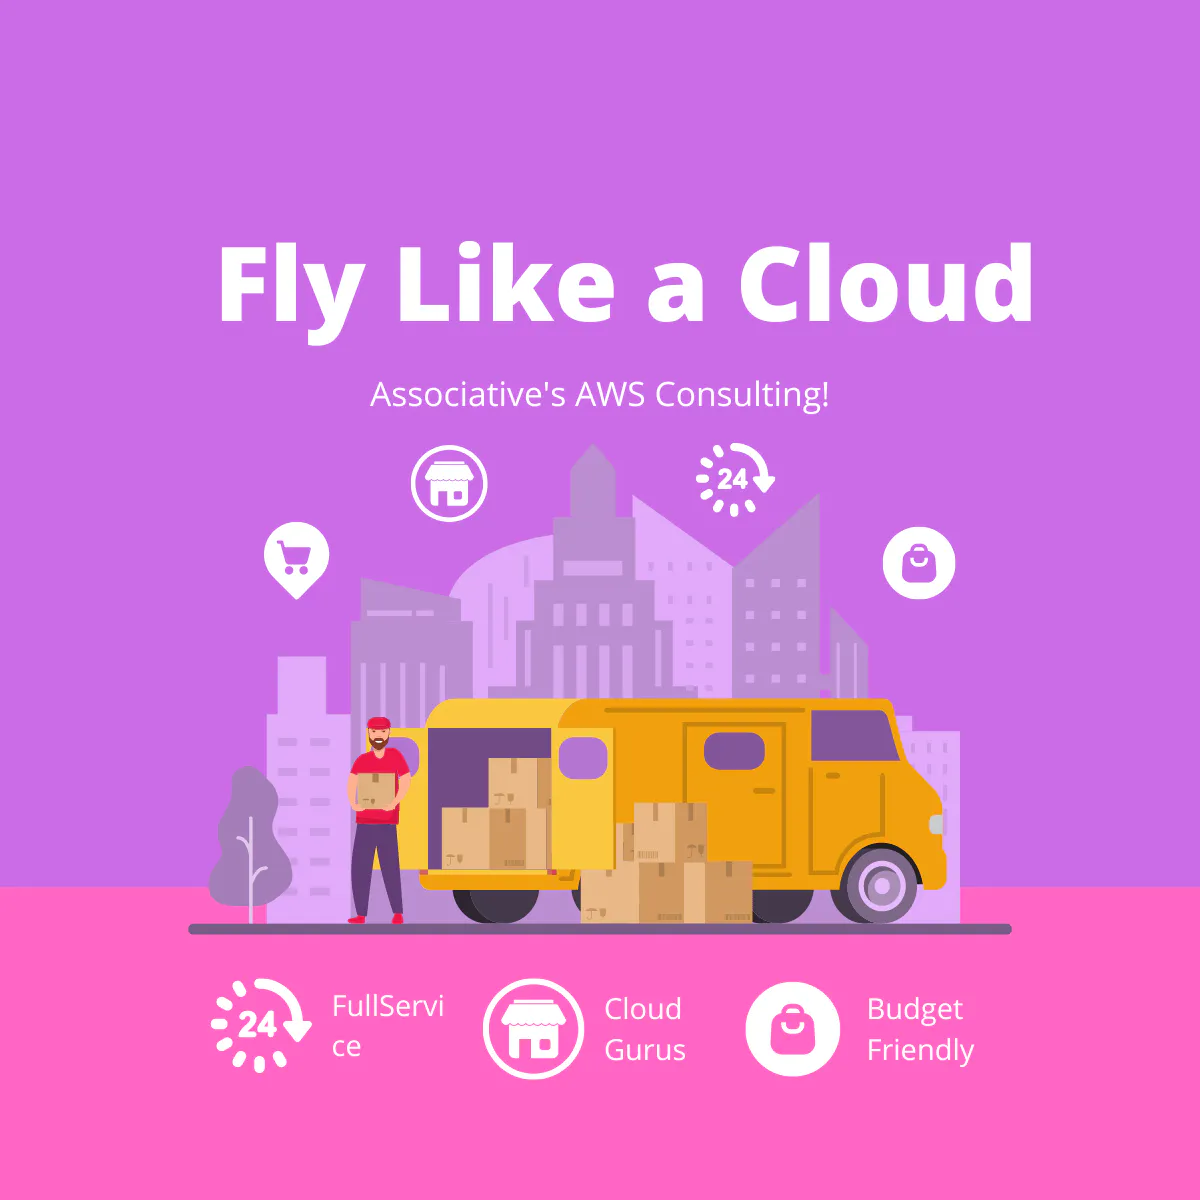 Pune Business, Fly Like a Cloud with Associative's AWS Consulting!